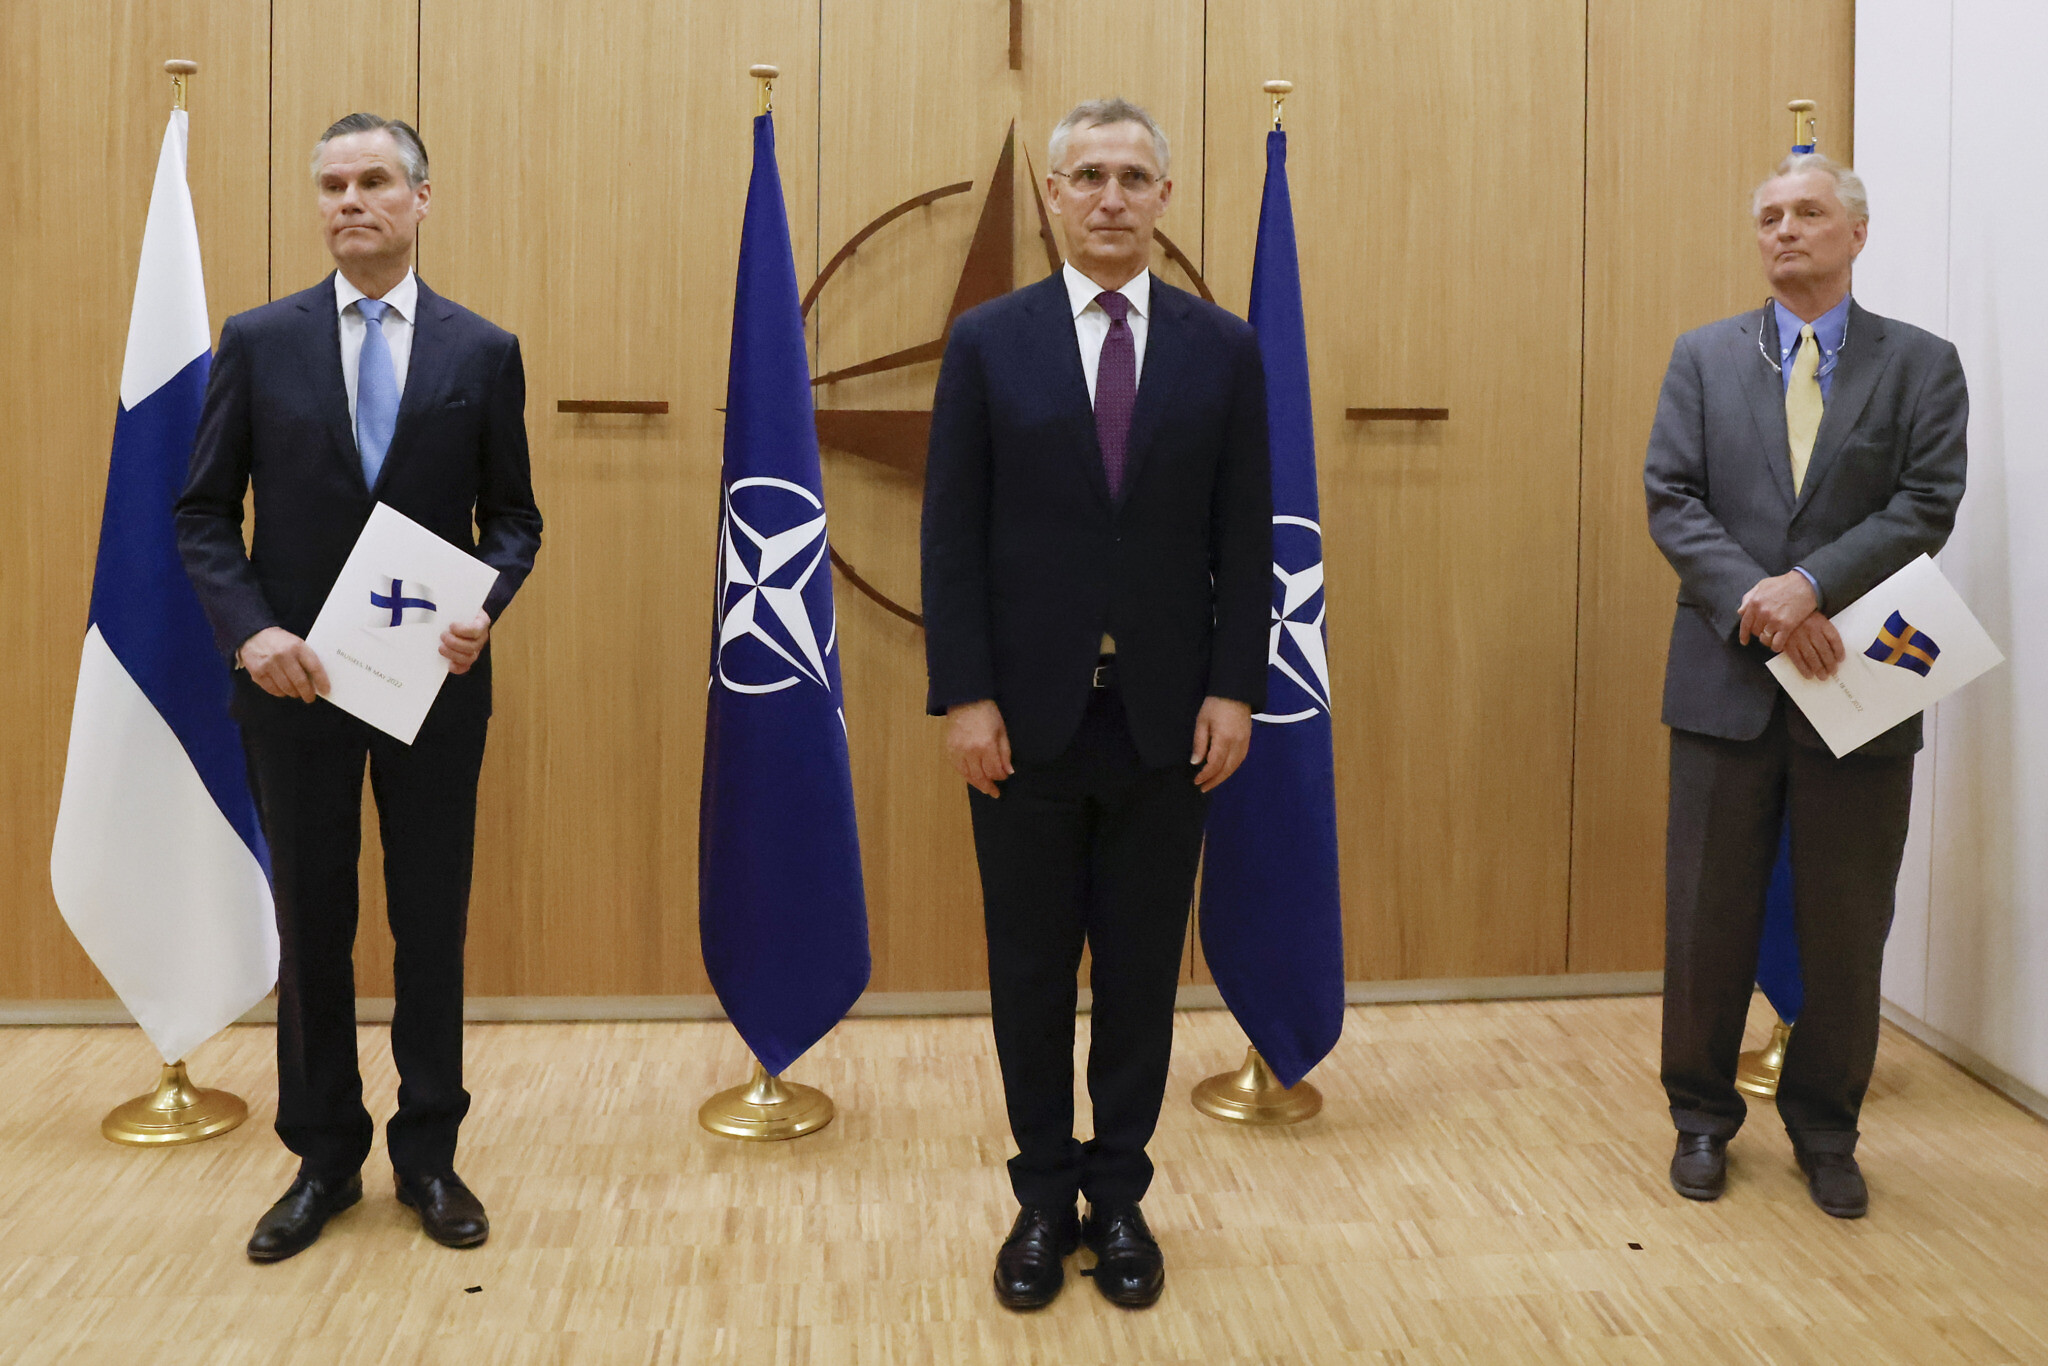 NATO chief hails 'historic moment' as Finland, Sweden apply | The Times of Israel